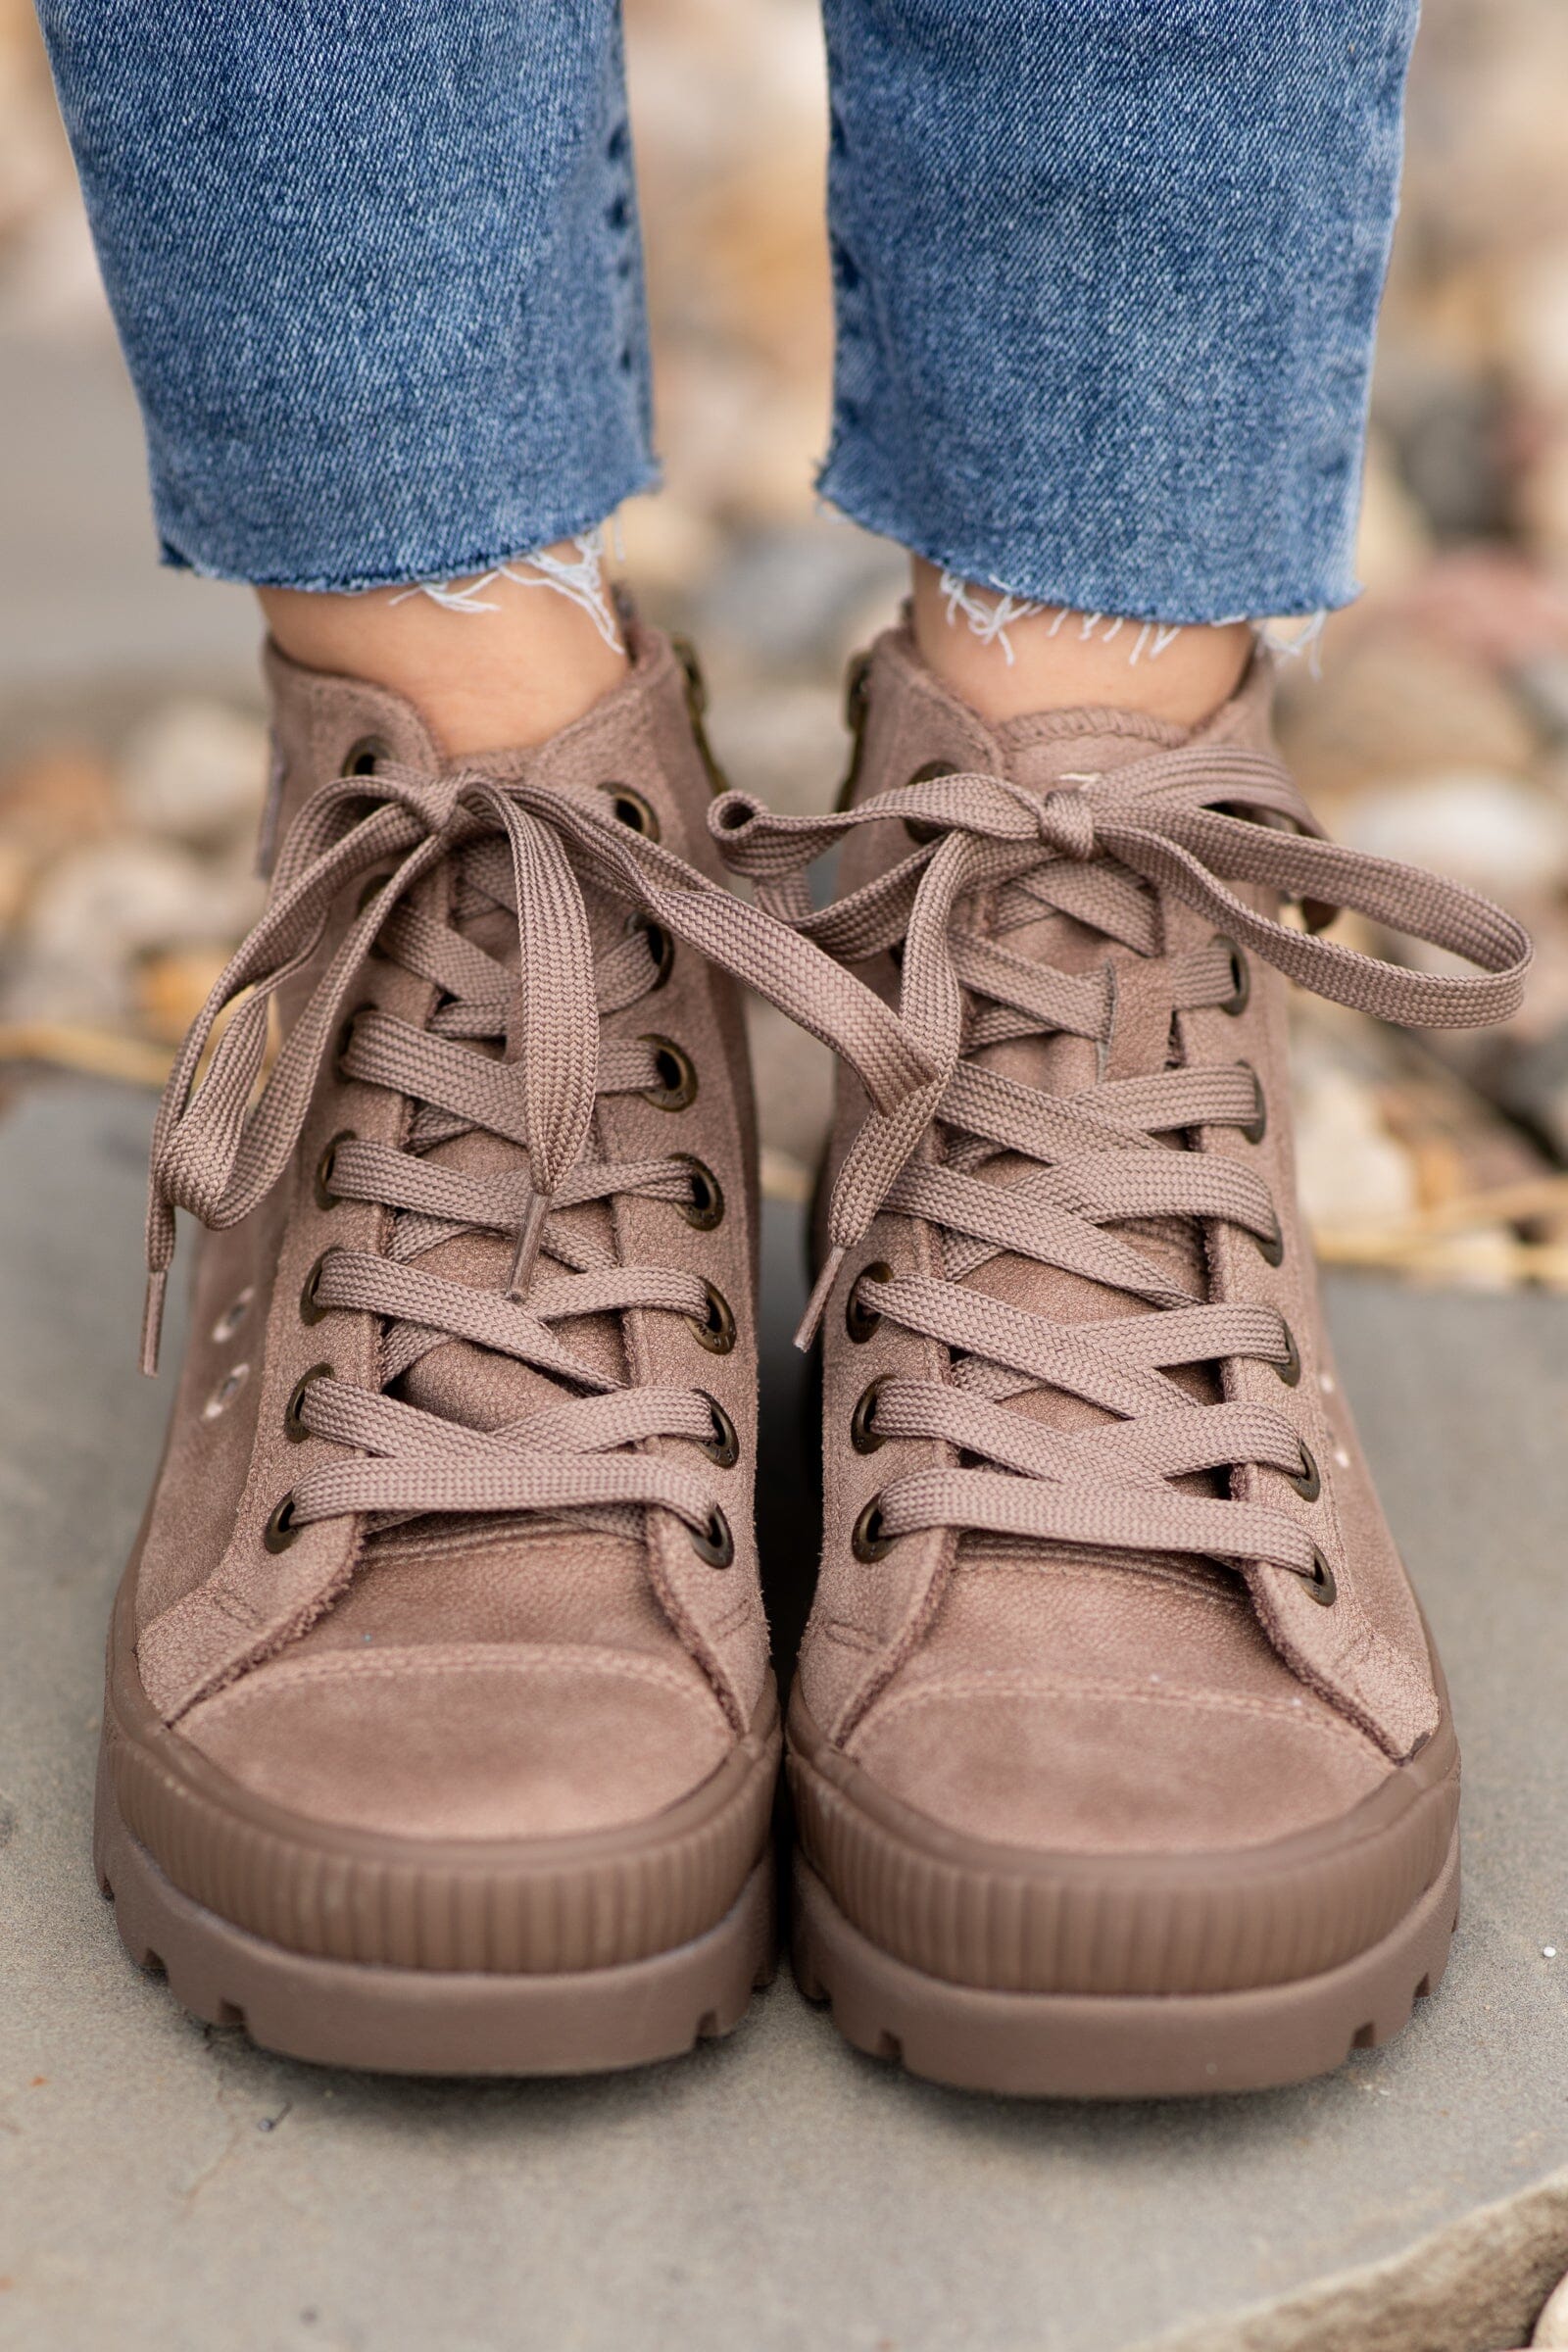 Mocha High Top Lug Sole Sneakers - Filly Flair